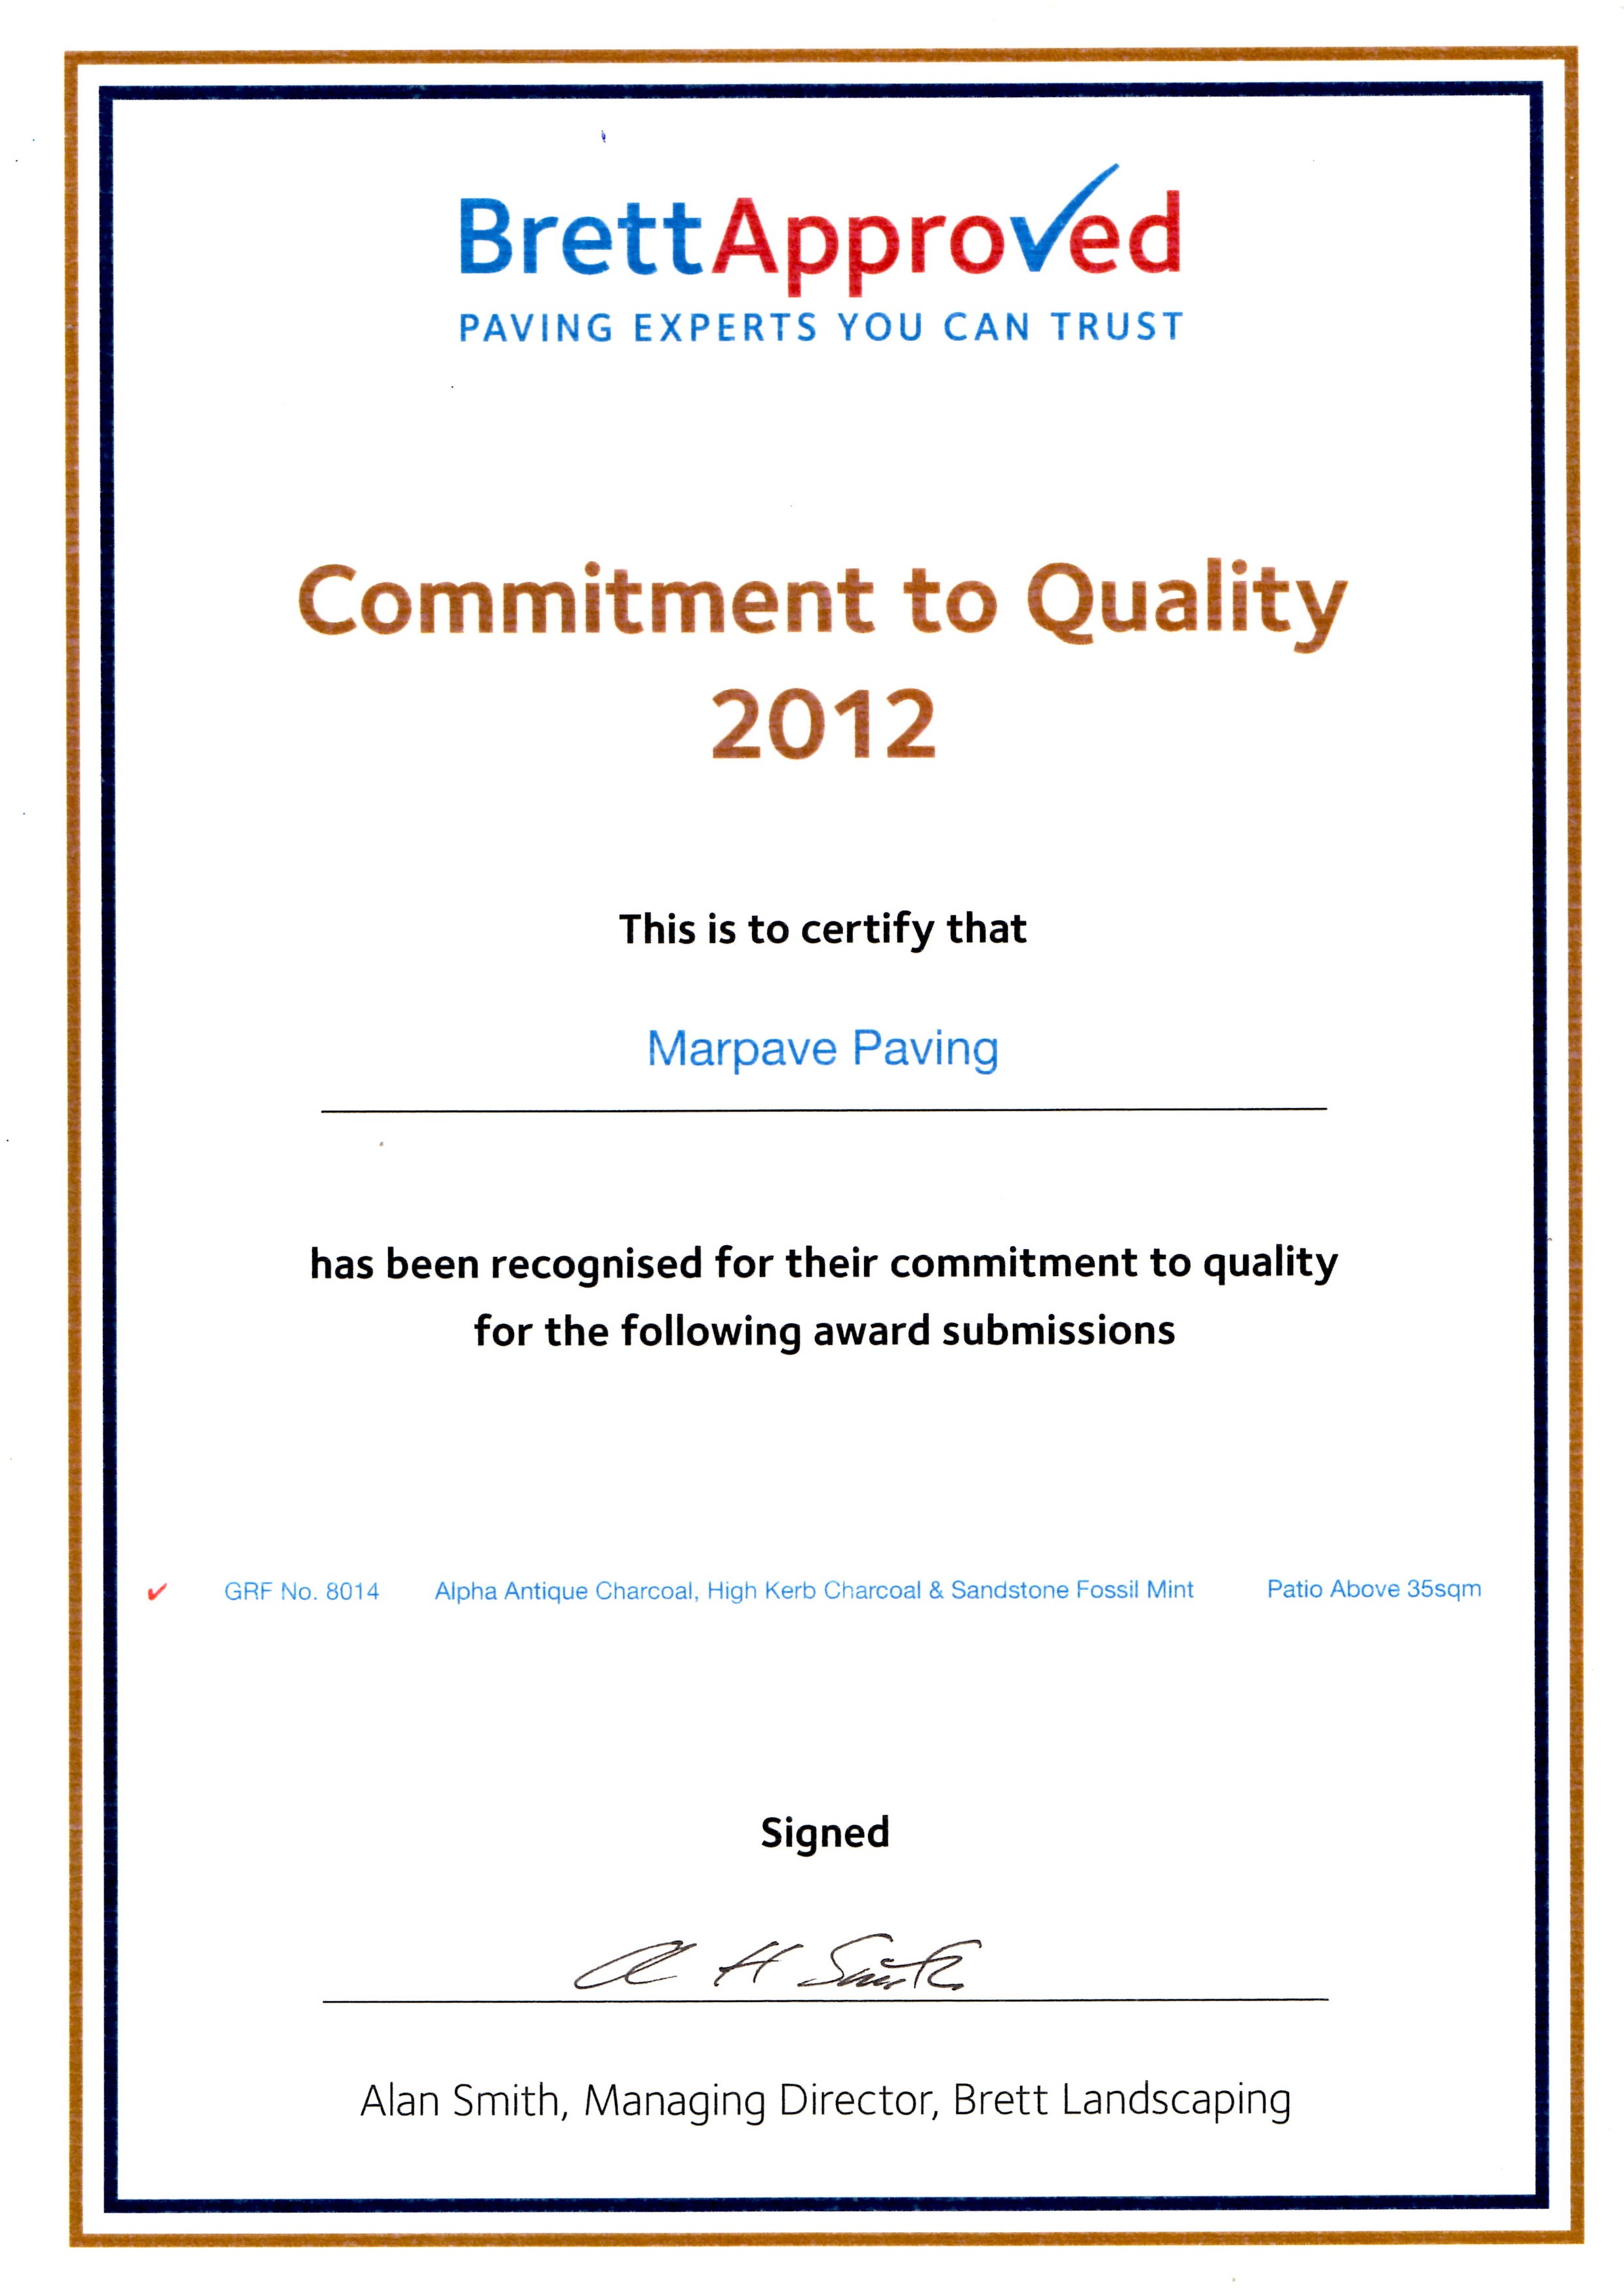 Continued Commitment to Quality